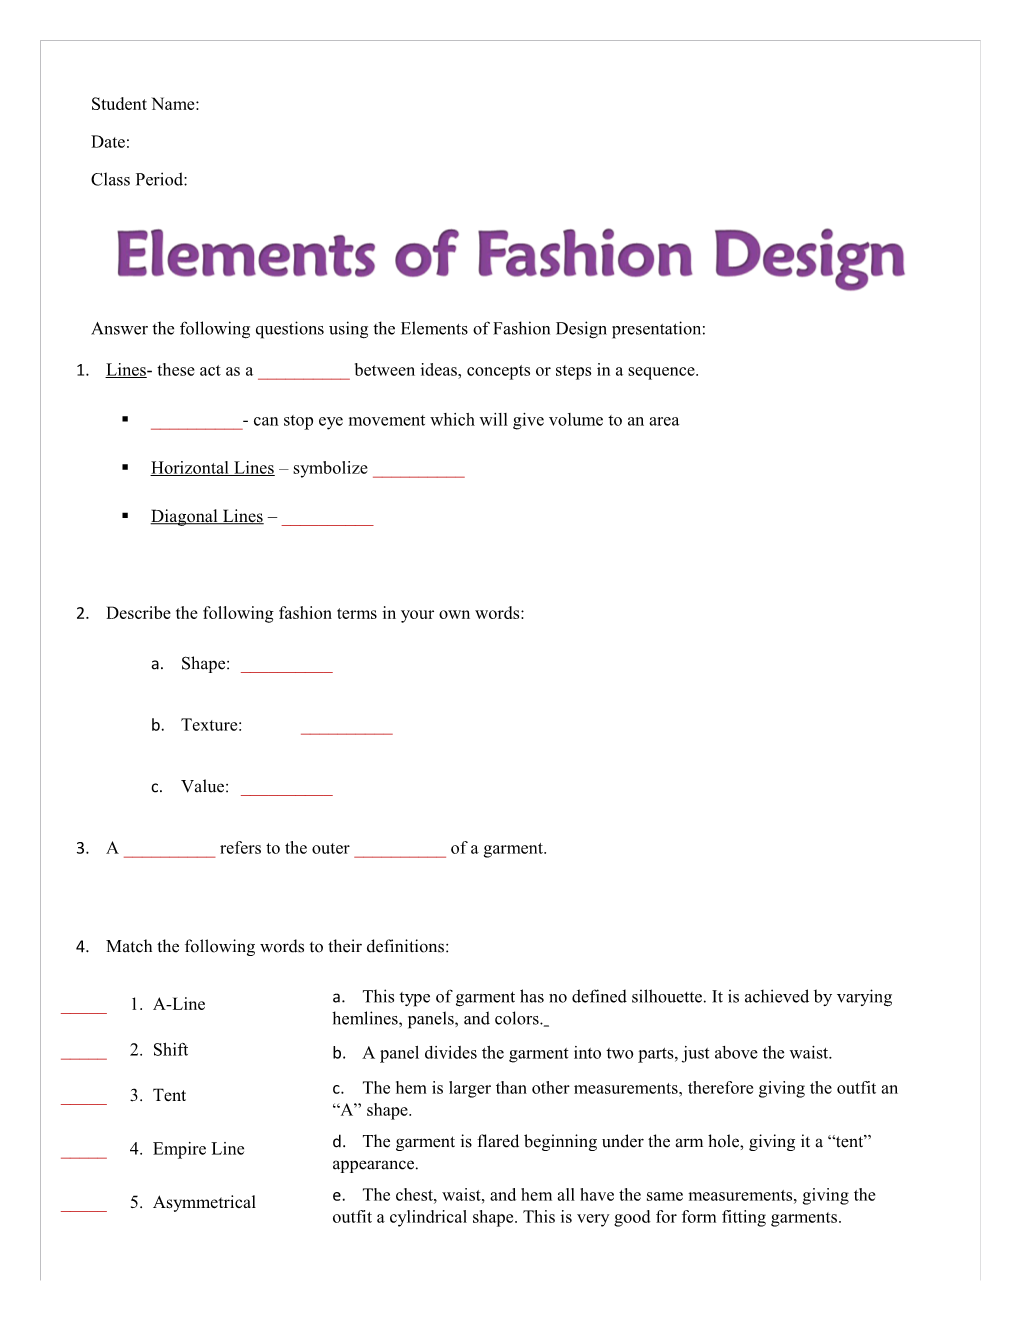 Answer the Following Questions Using the Elements of Fashion Design Presentation